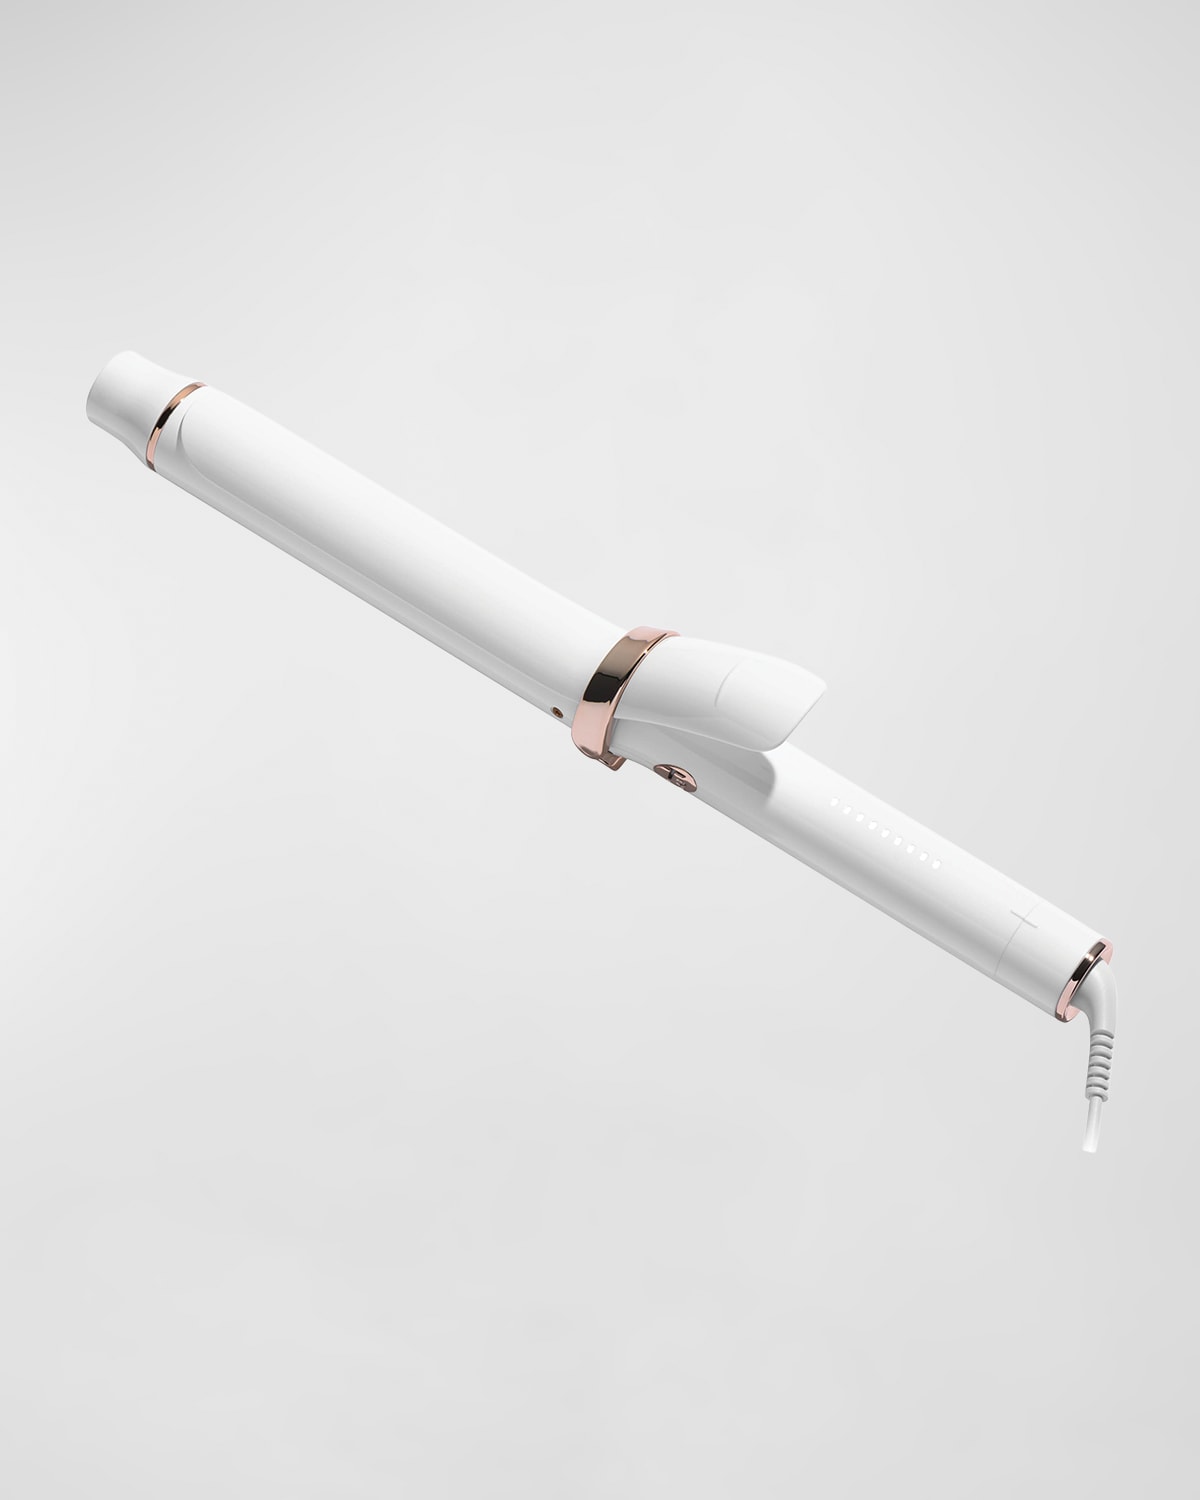 T3 Singlepass Curl X 1.25" Ceramic Extra-long Barrel Curling Iron In White